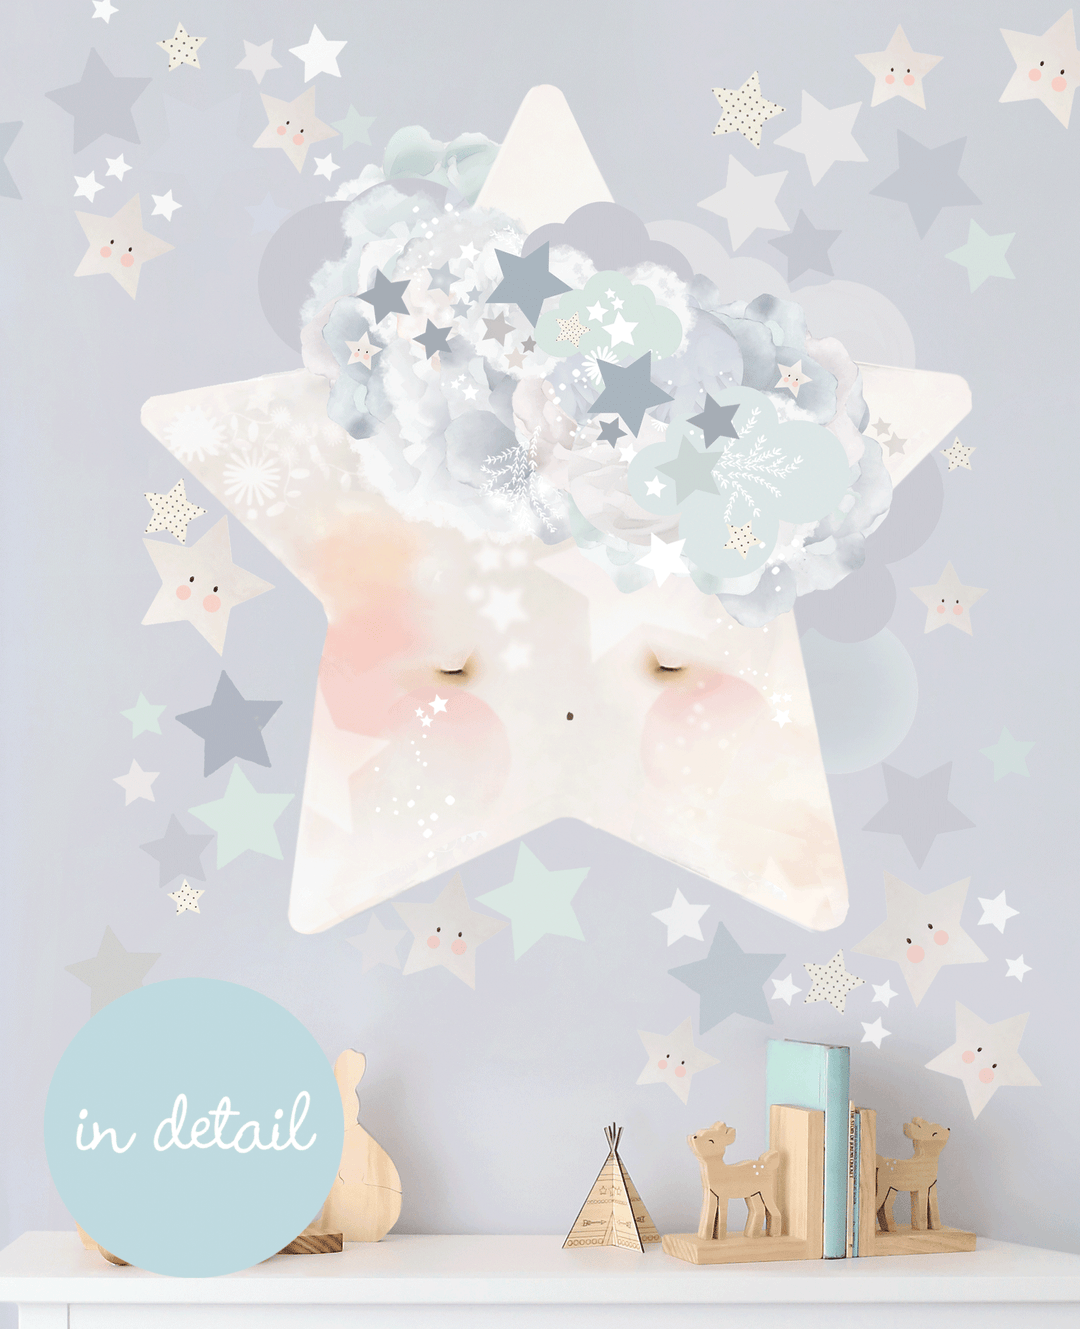 Wish-upon-a-star-decal-Schmooks-Tutu-Irresistible-Boutique-Wall-Art